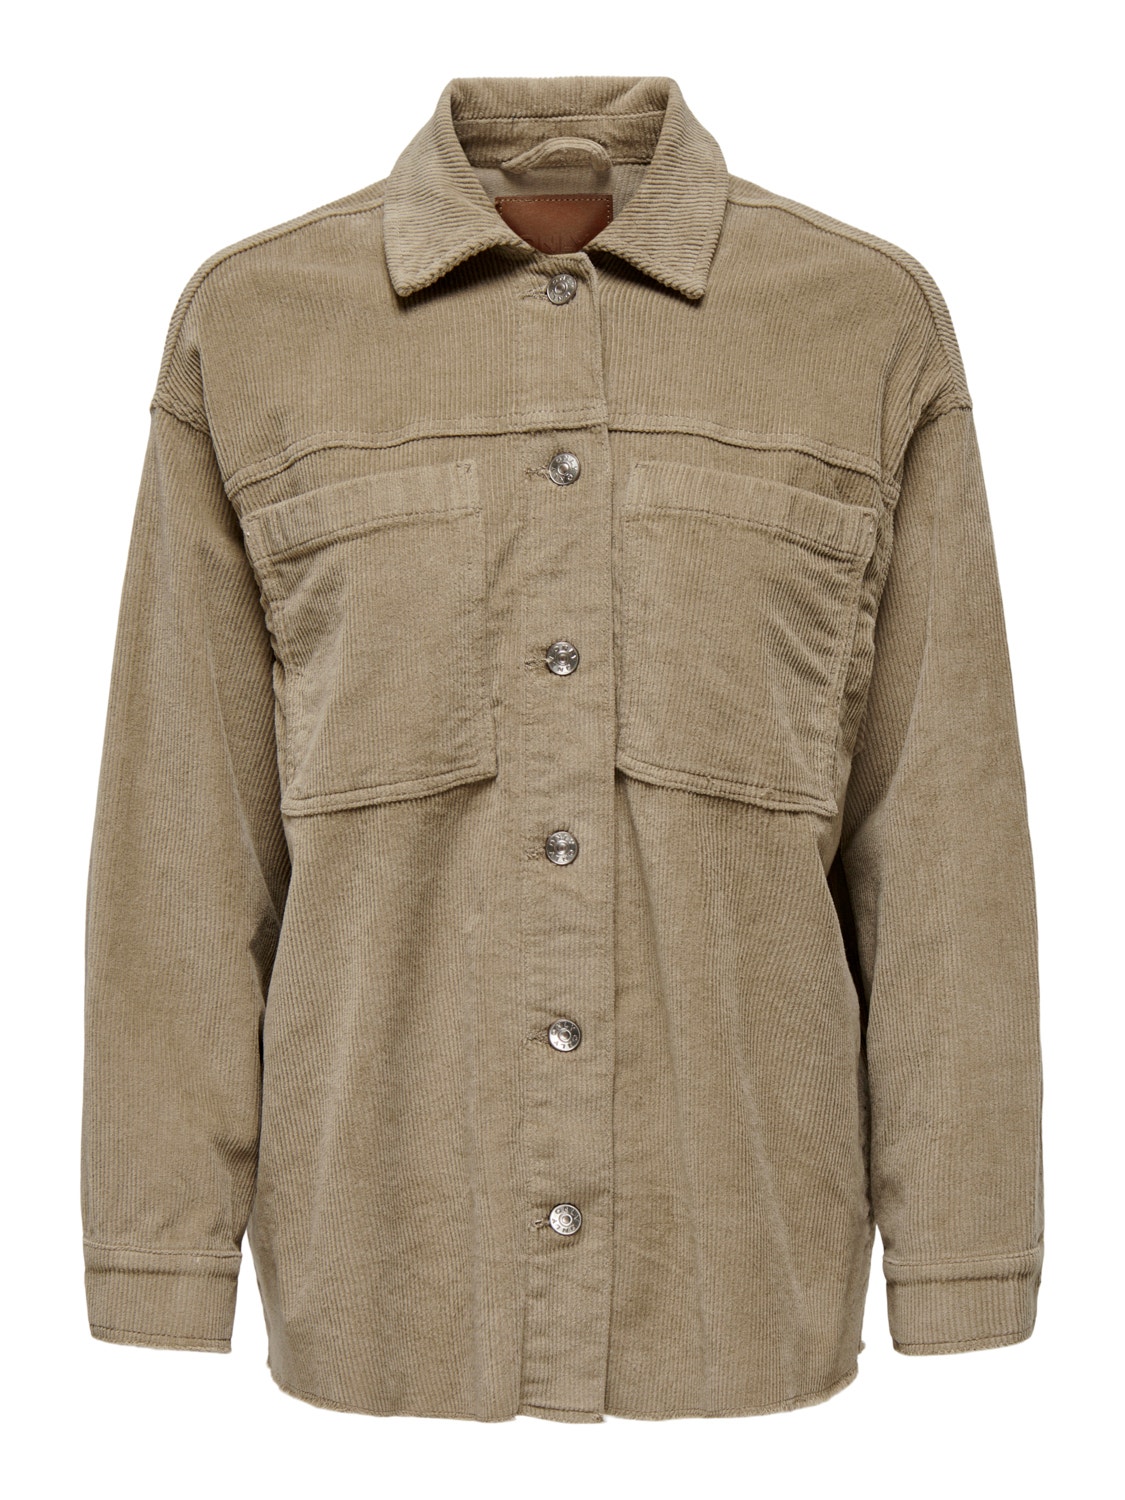 ONLY Spread collar Jacket -Weathered Teak - 15298655